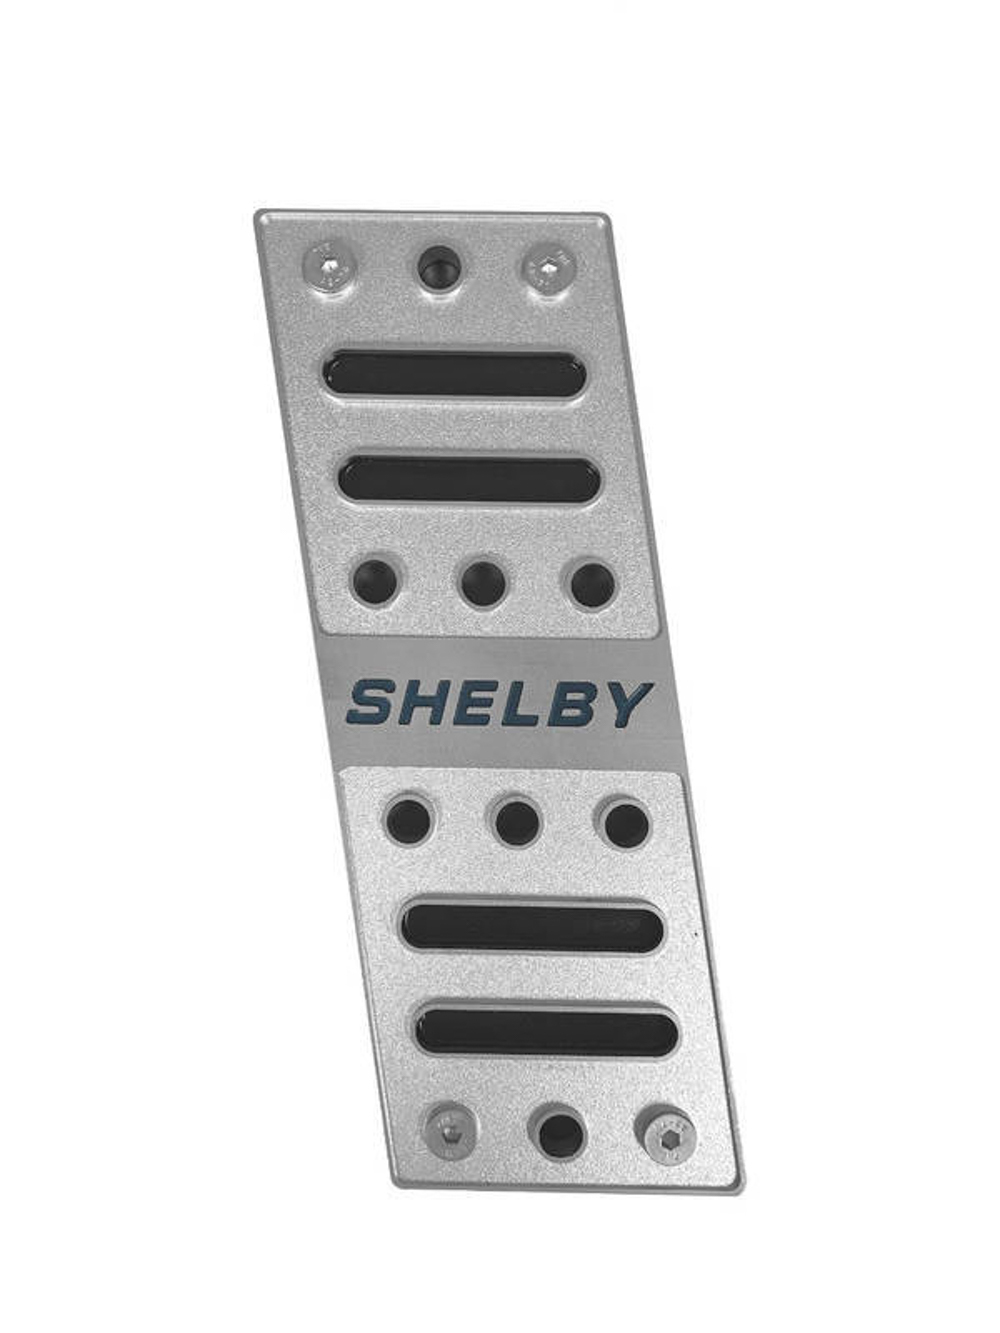 15-17 Shelby Dead Pedal Cover